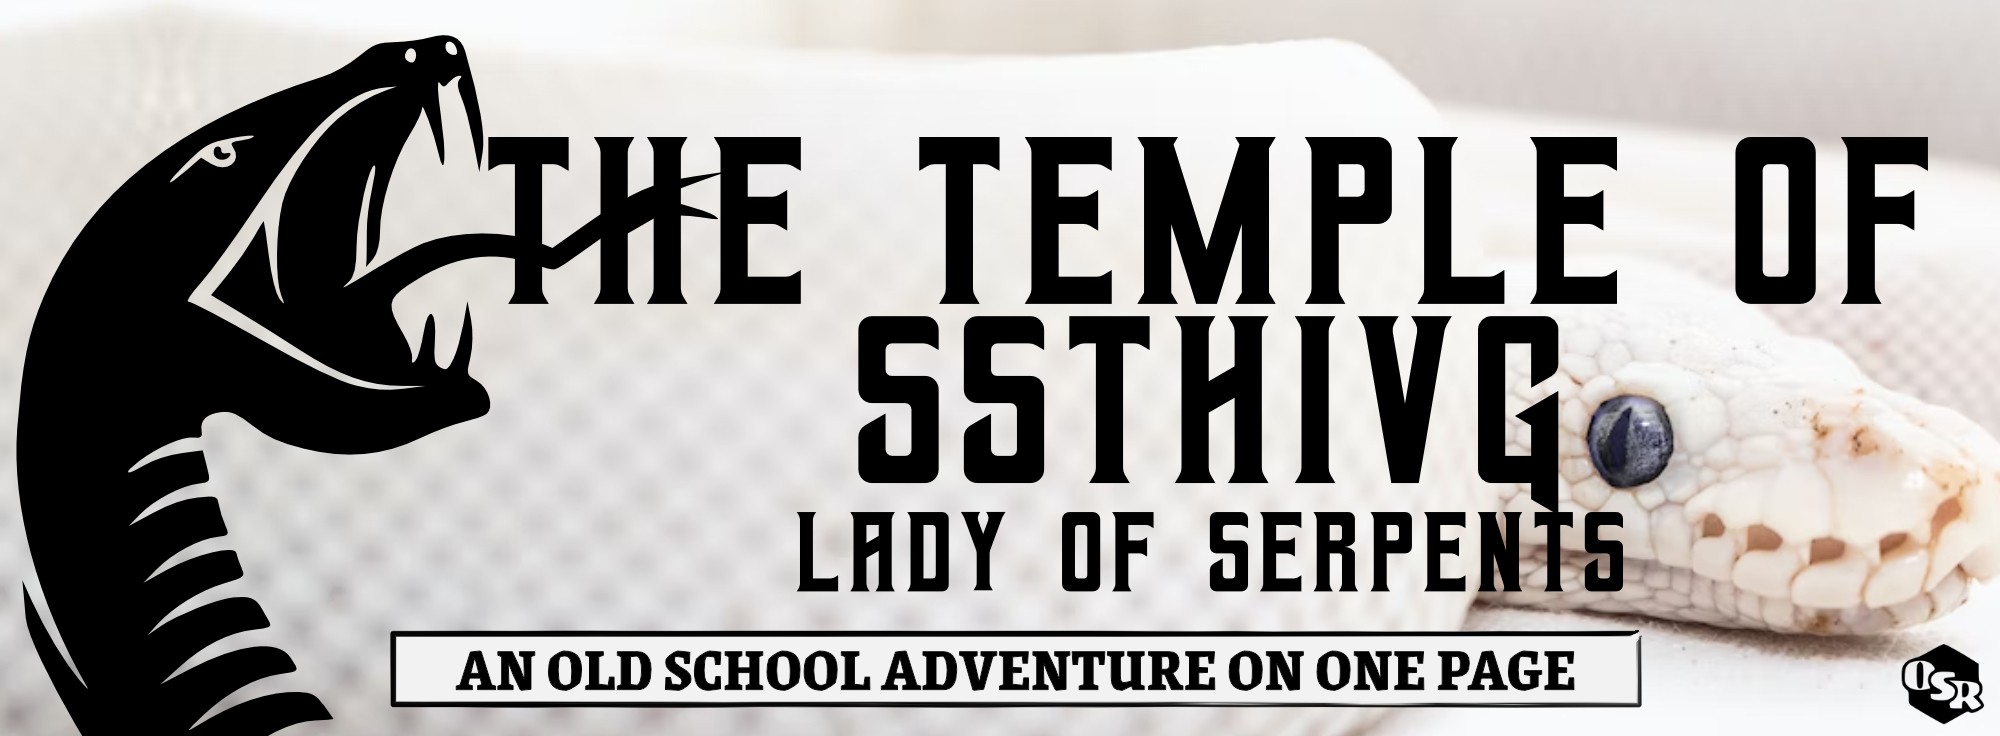 The Temple of Ssthivg